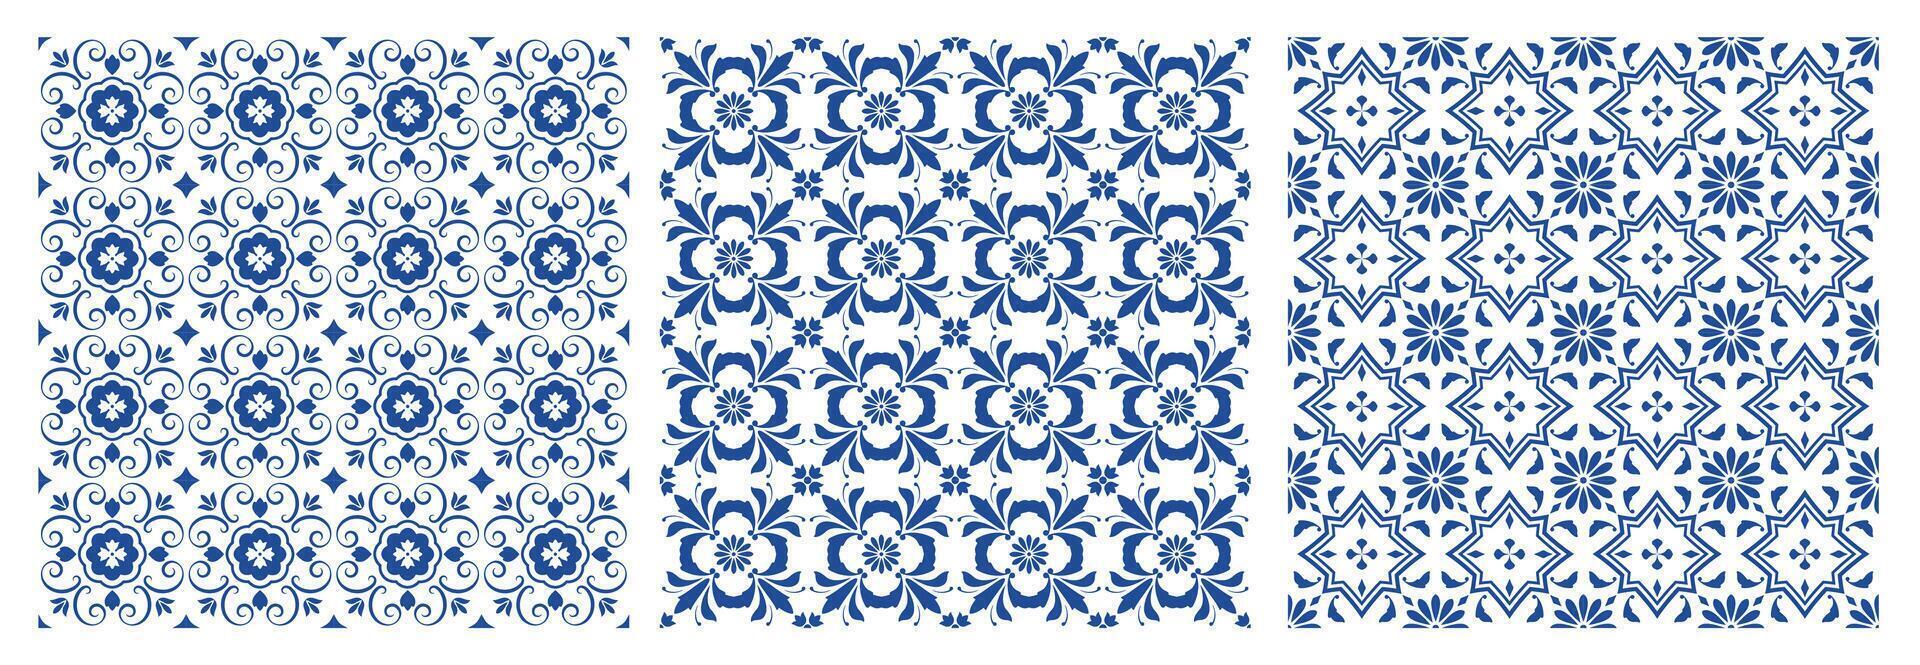 Ceramic kitchen patchwork. Seamless print of vintage oriental mosaic tiles, moroccan floor wall decoration with ornamental patterns. texture vector